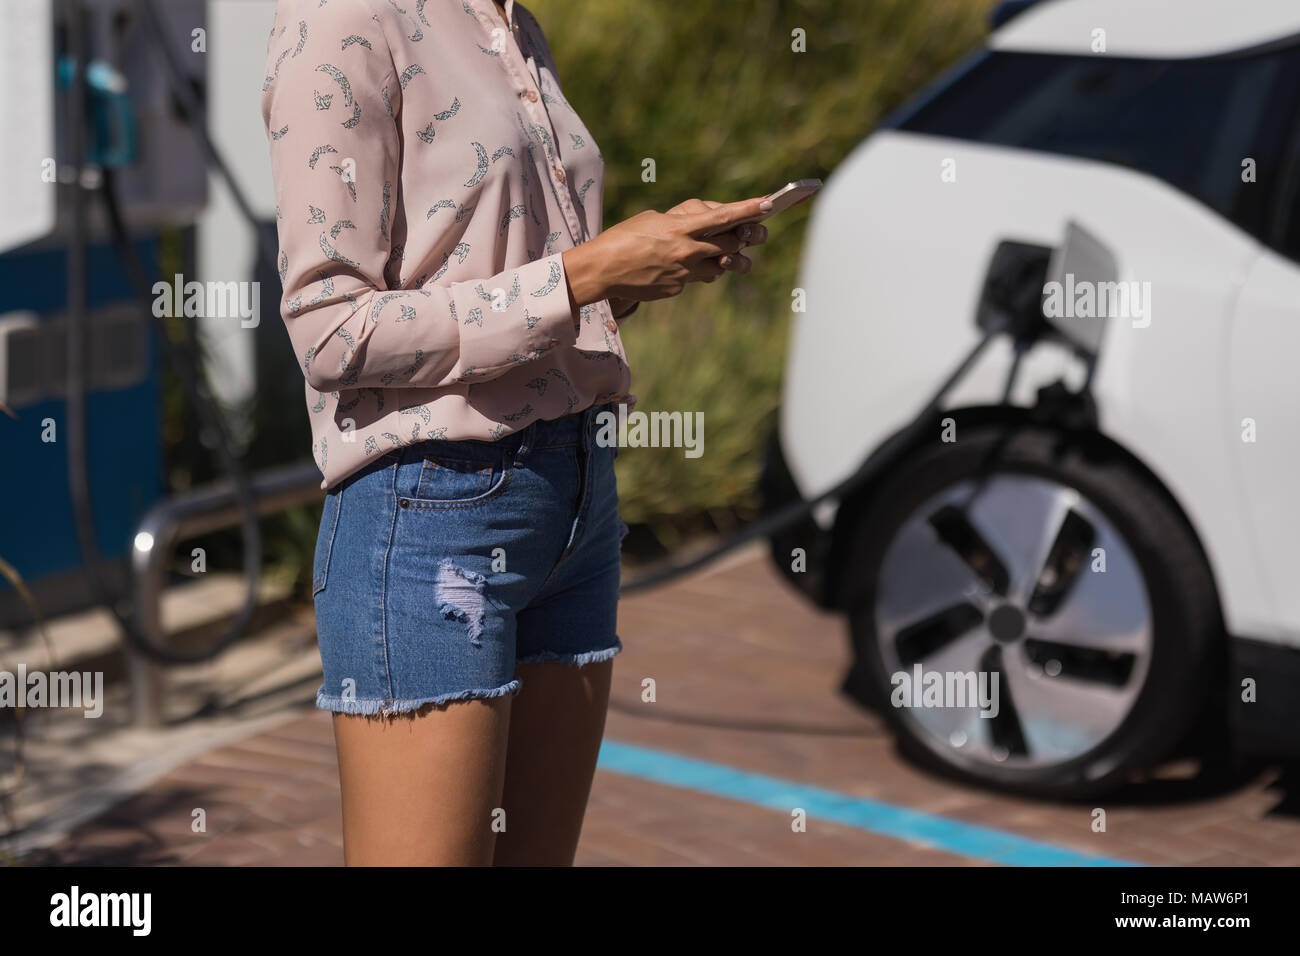 Woman using mobile phone while charging electric car at service station Stock Photo